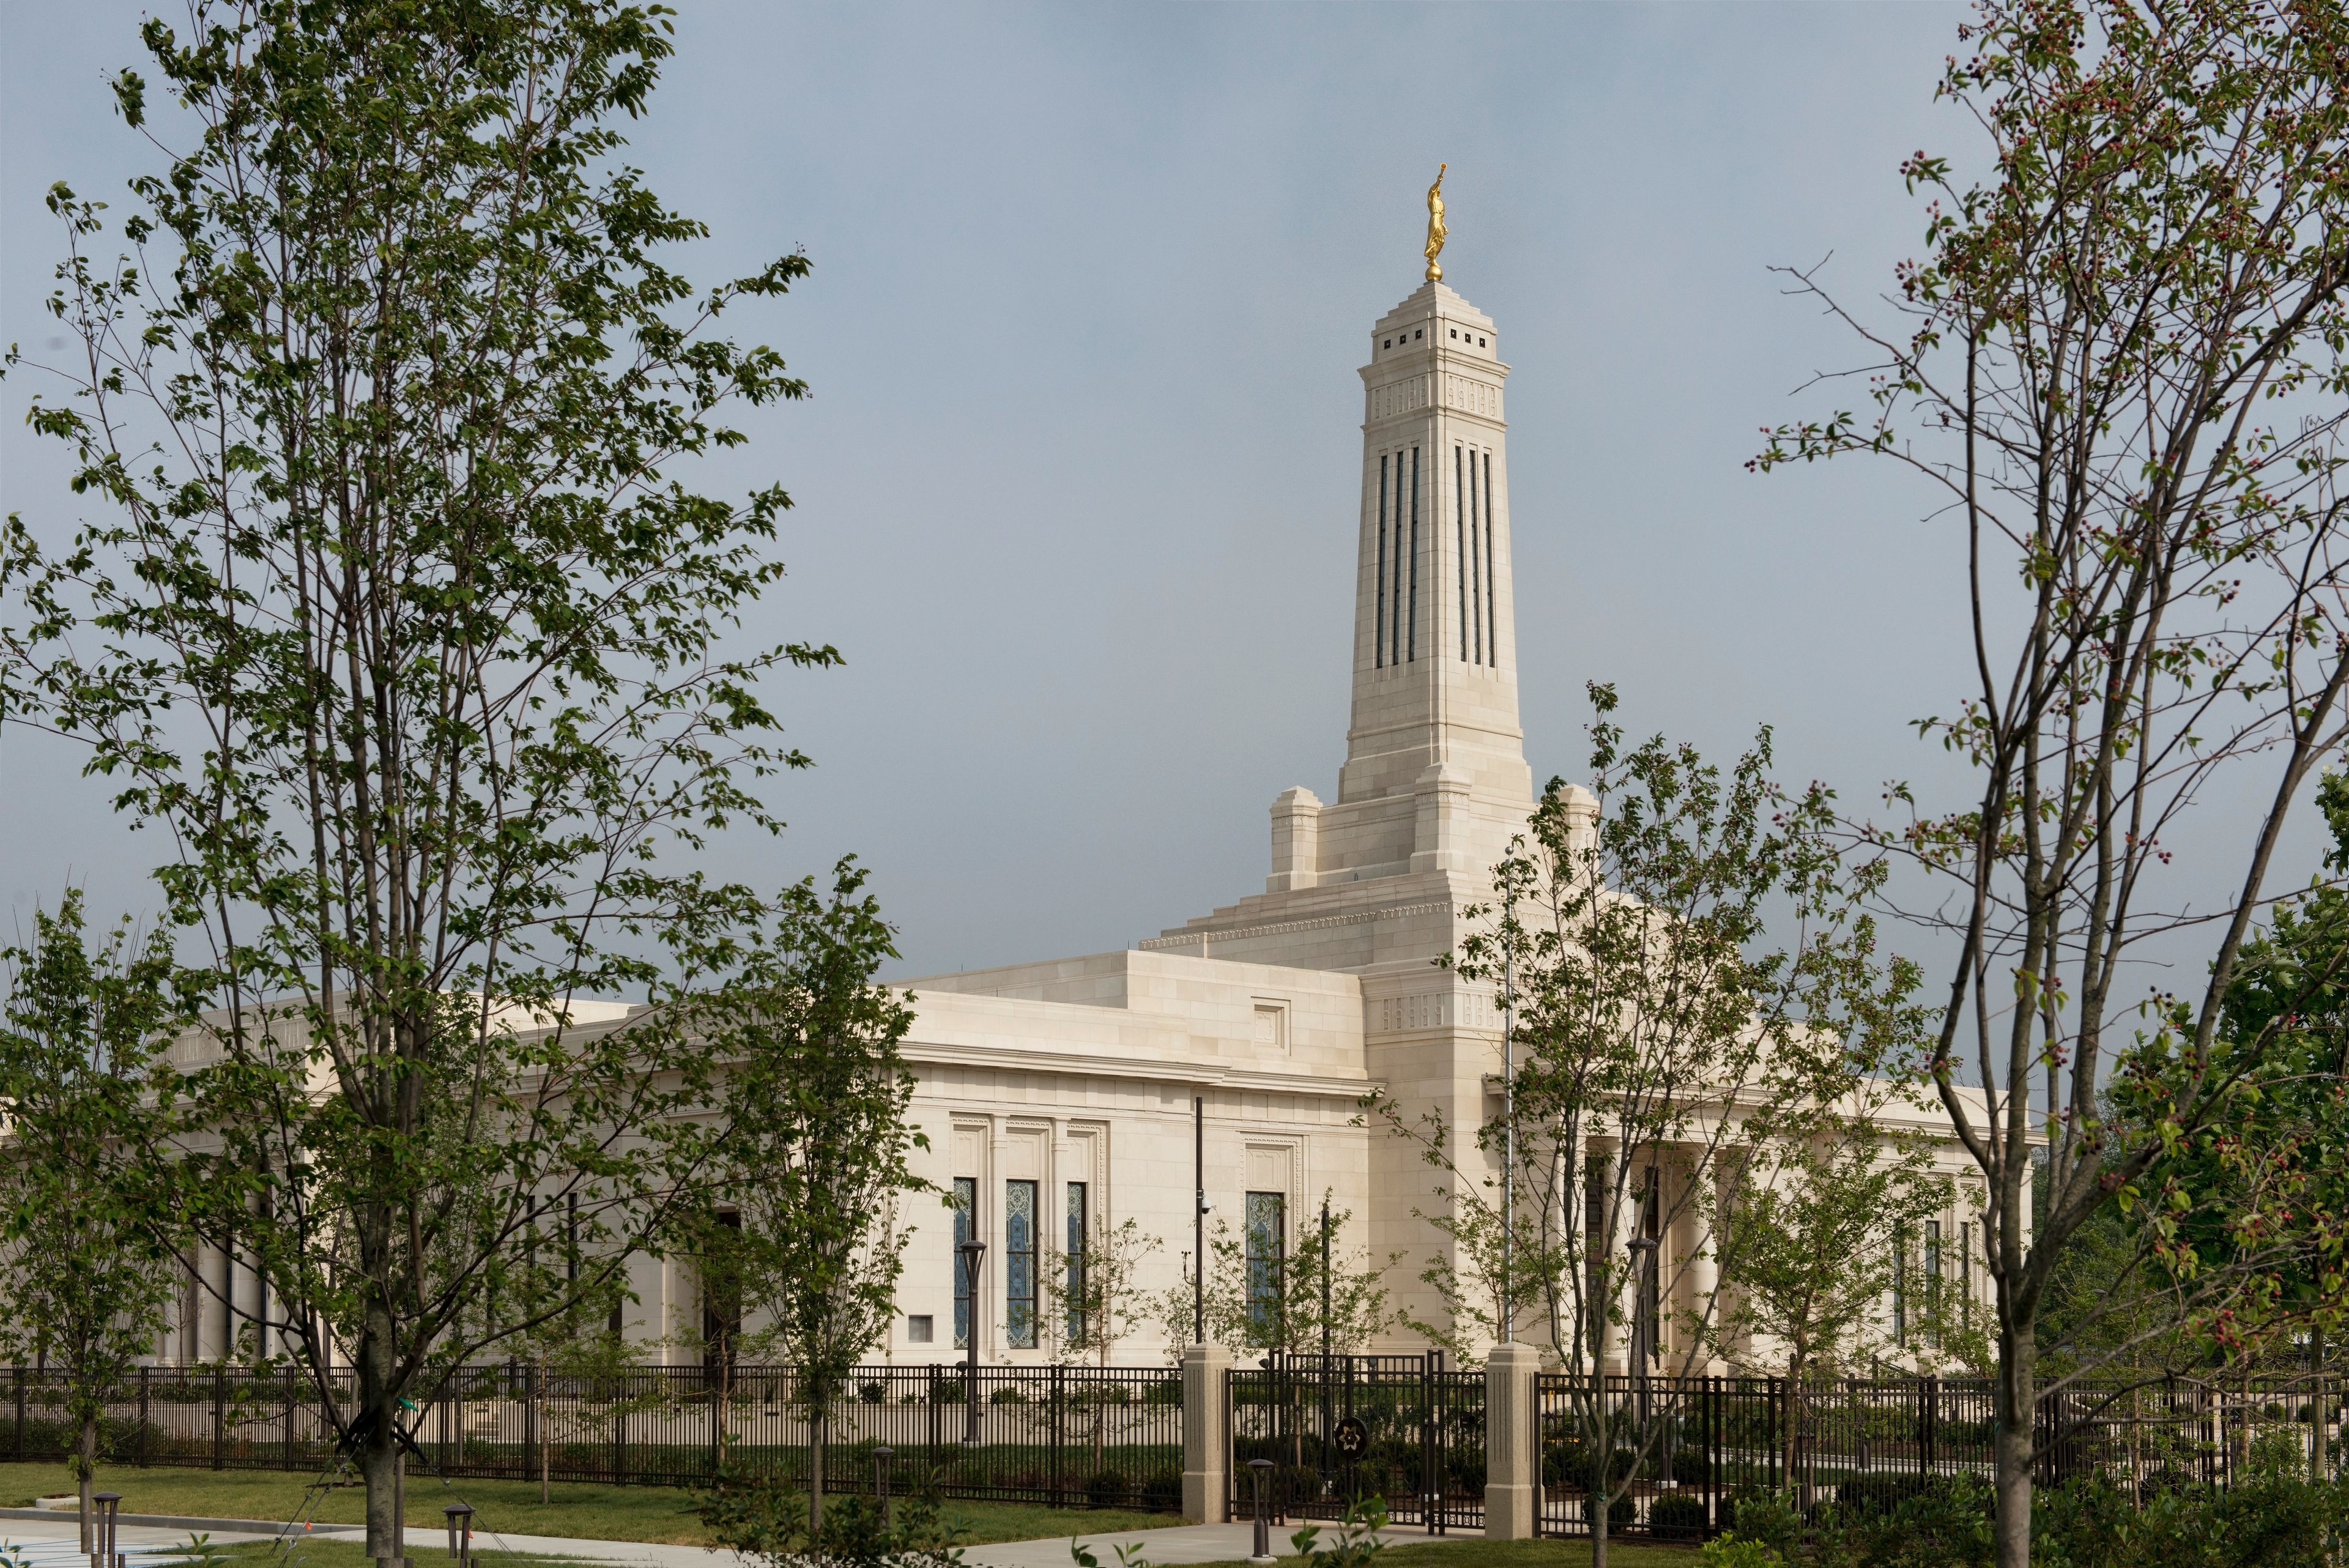 Trees in front of the Indianapolis Indiana Temple on a cloudy day.